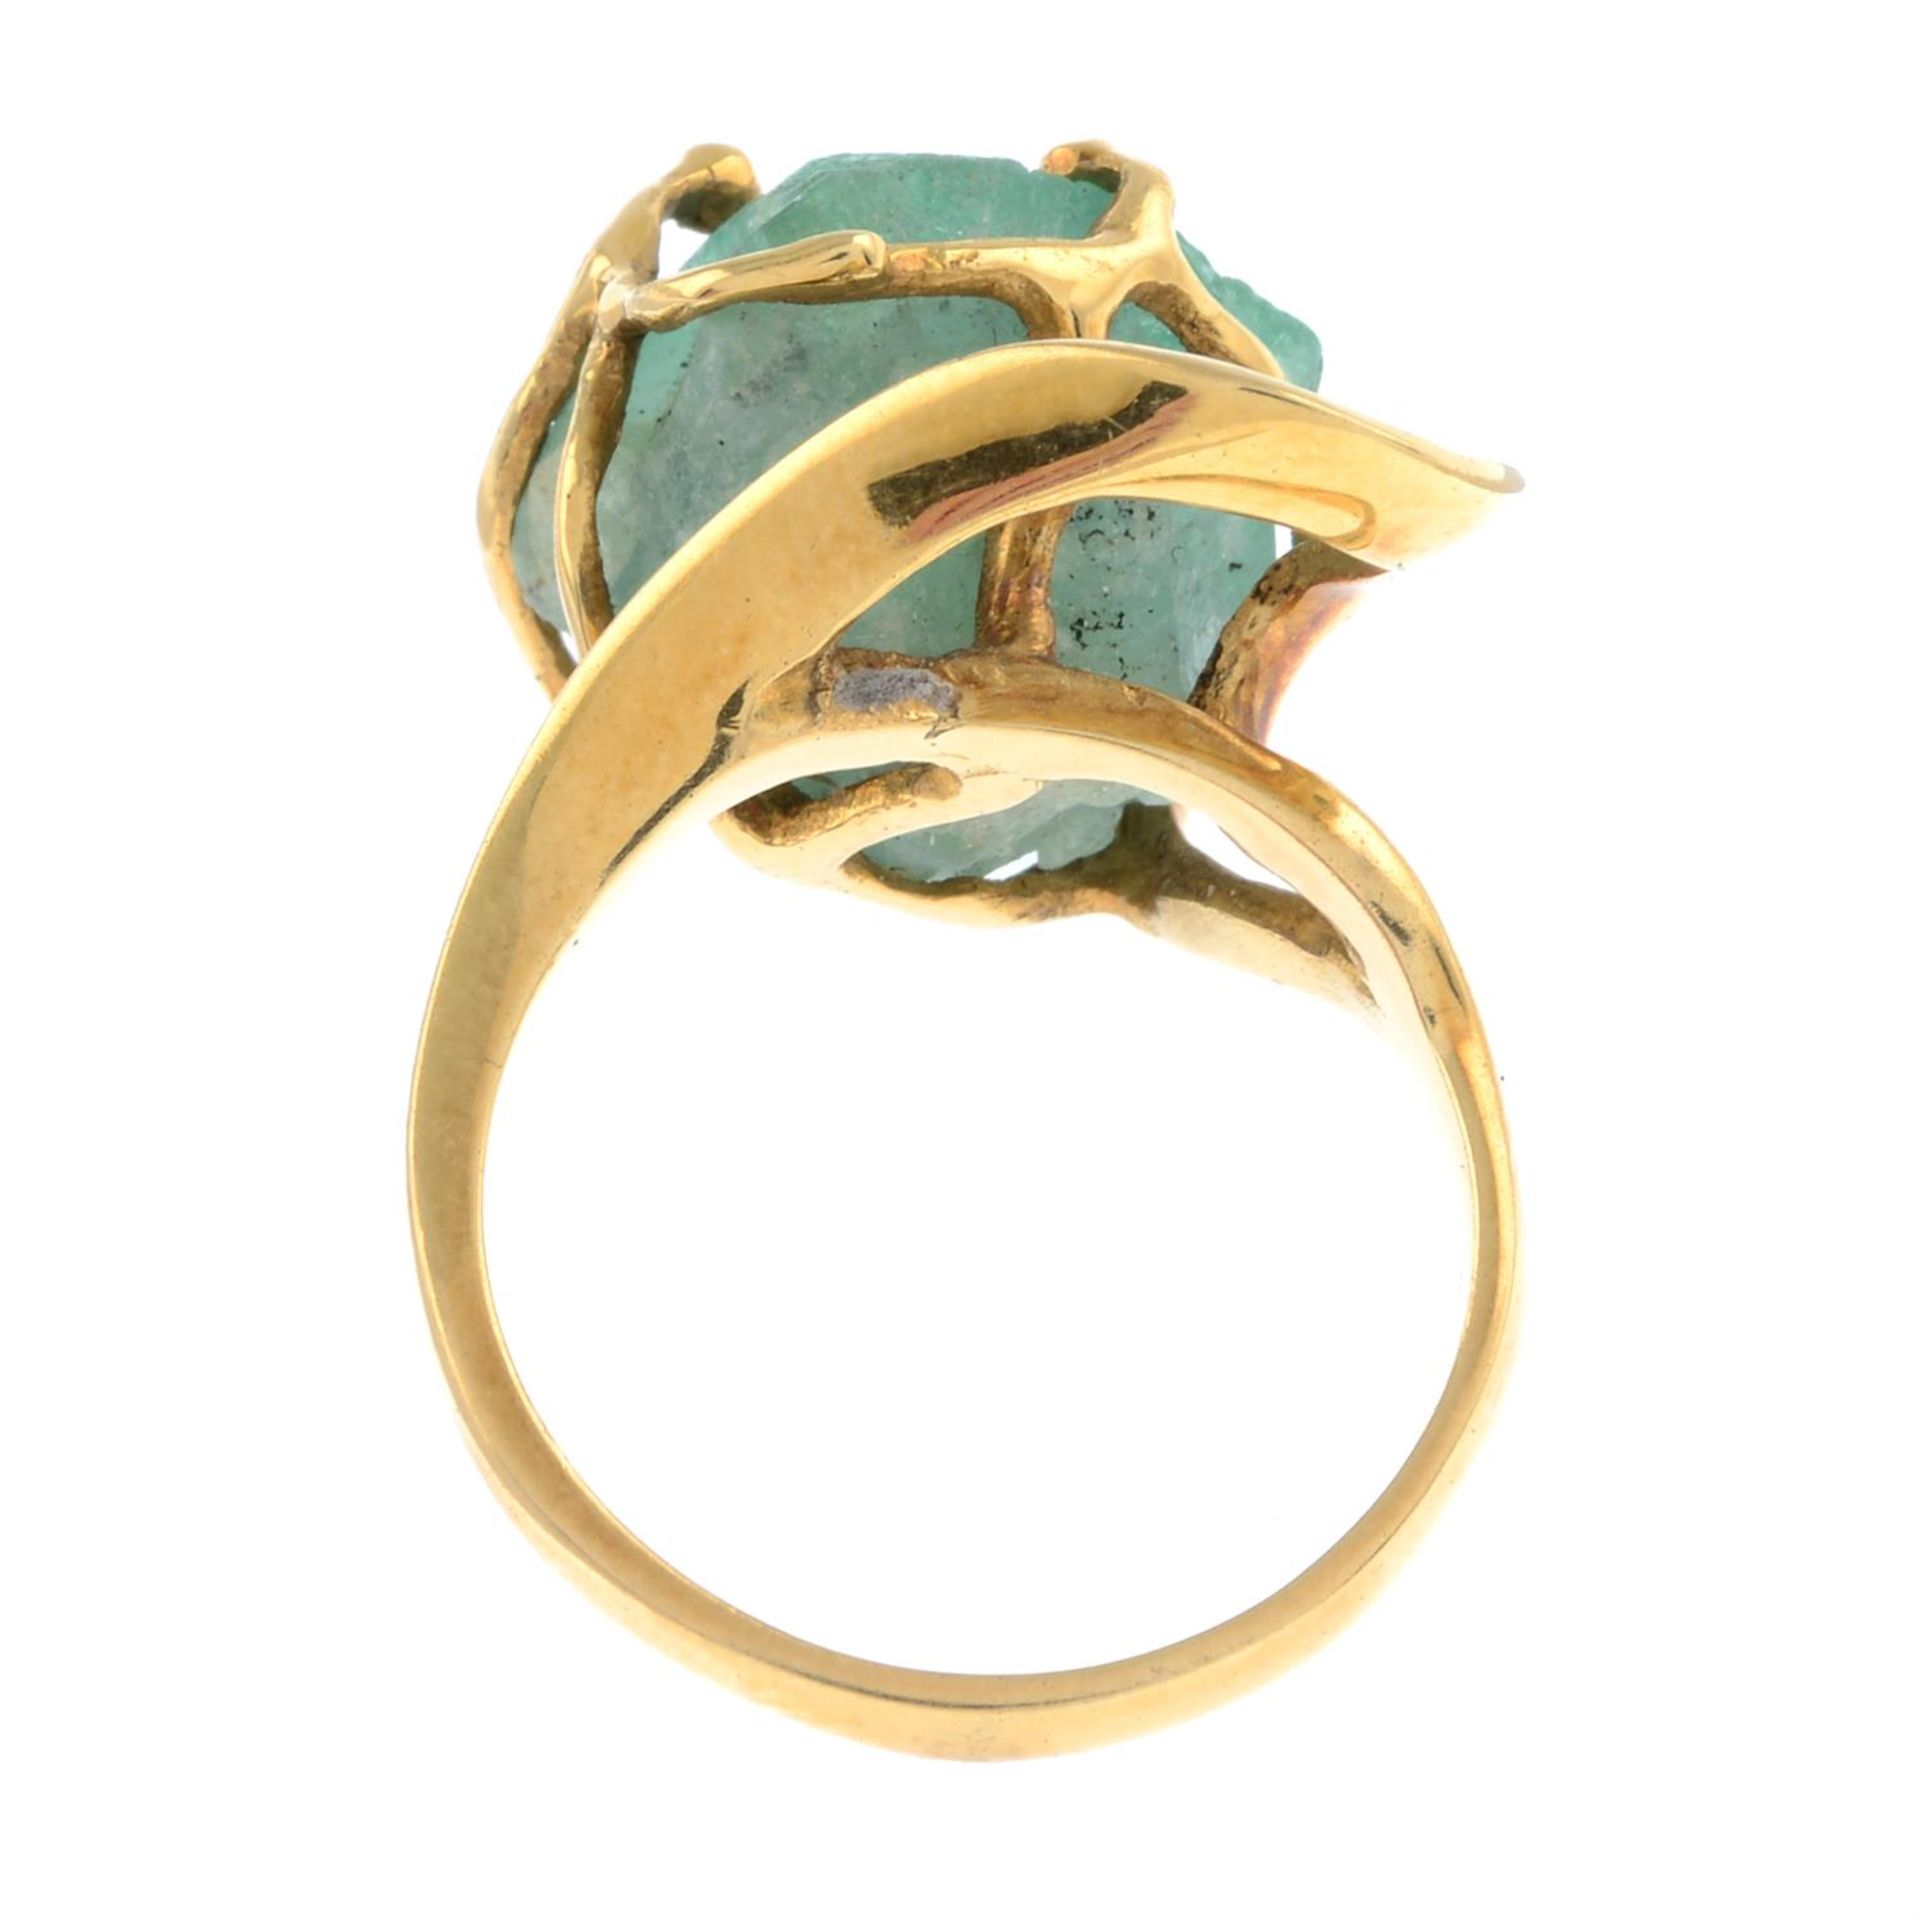 Emerald crystal dress ring - Image 2 of 2